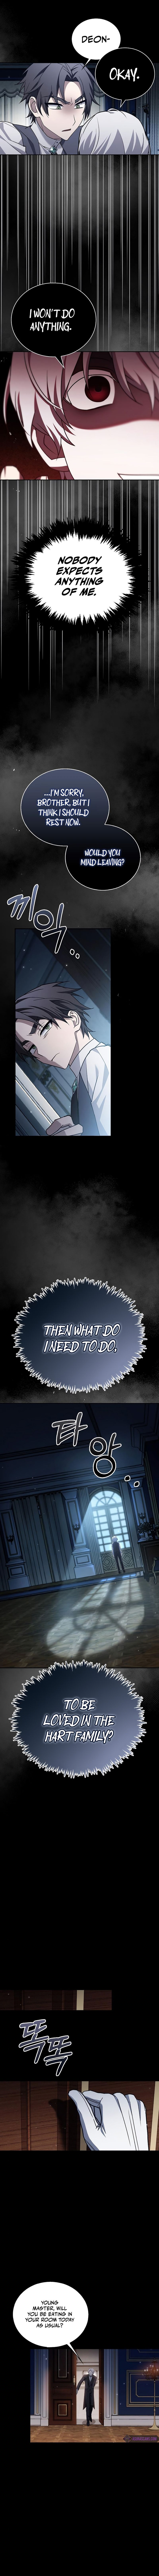 I’m Not That Kind of Talent Chapter 17 page 11